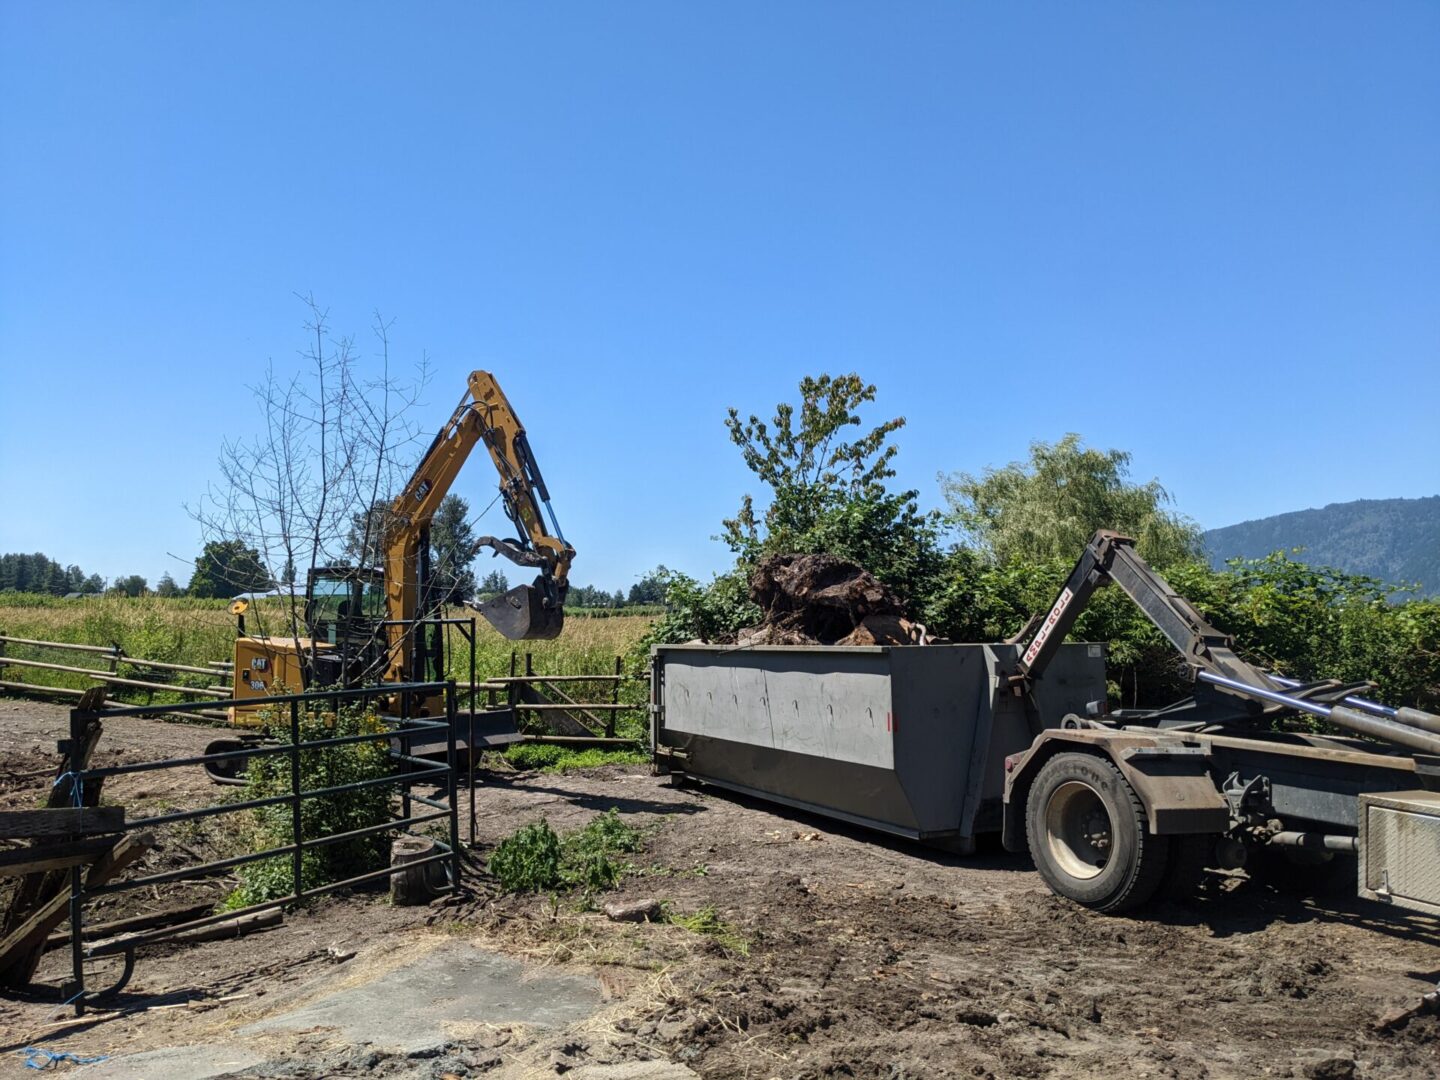 An excavator loading soil into a dump truck in a rural setting with trees and blue sky in the background.